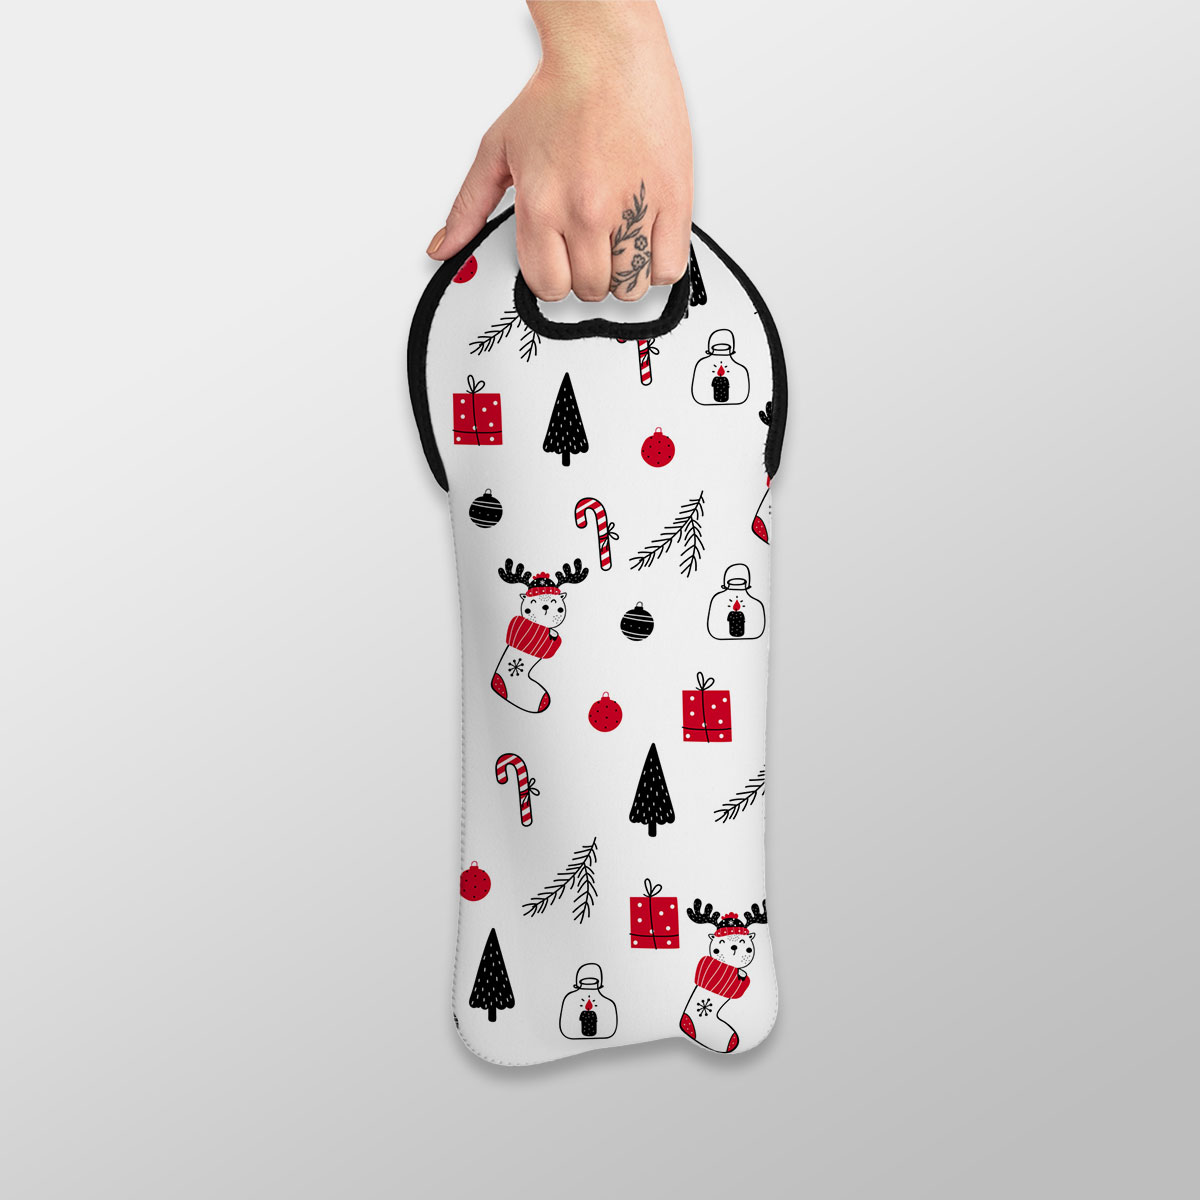 Reindeer Clipart In Hand Drawn Red Socks, Christmas Balls, Candy Canes, And Christmas Gifts Seamless White Pattern Wine Tote Bag